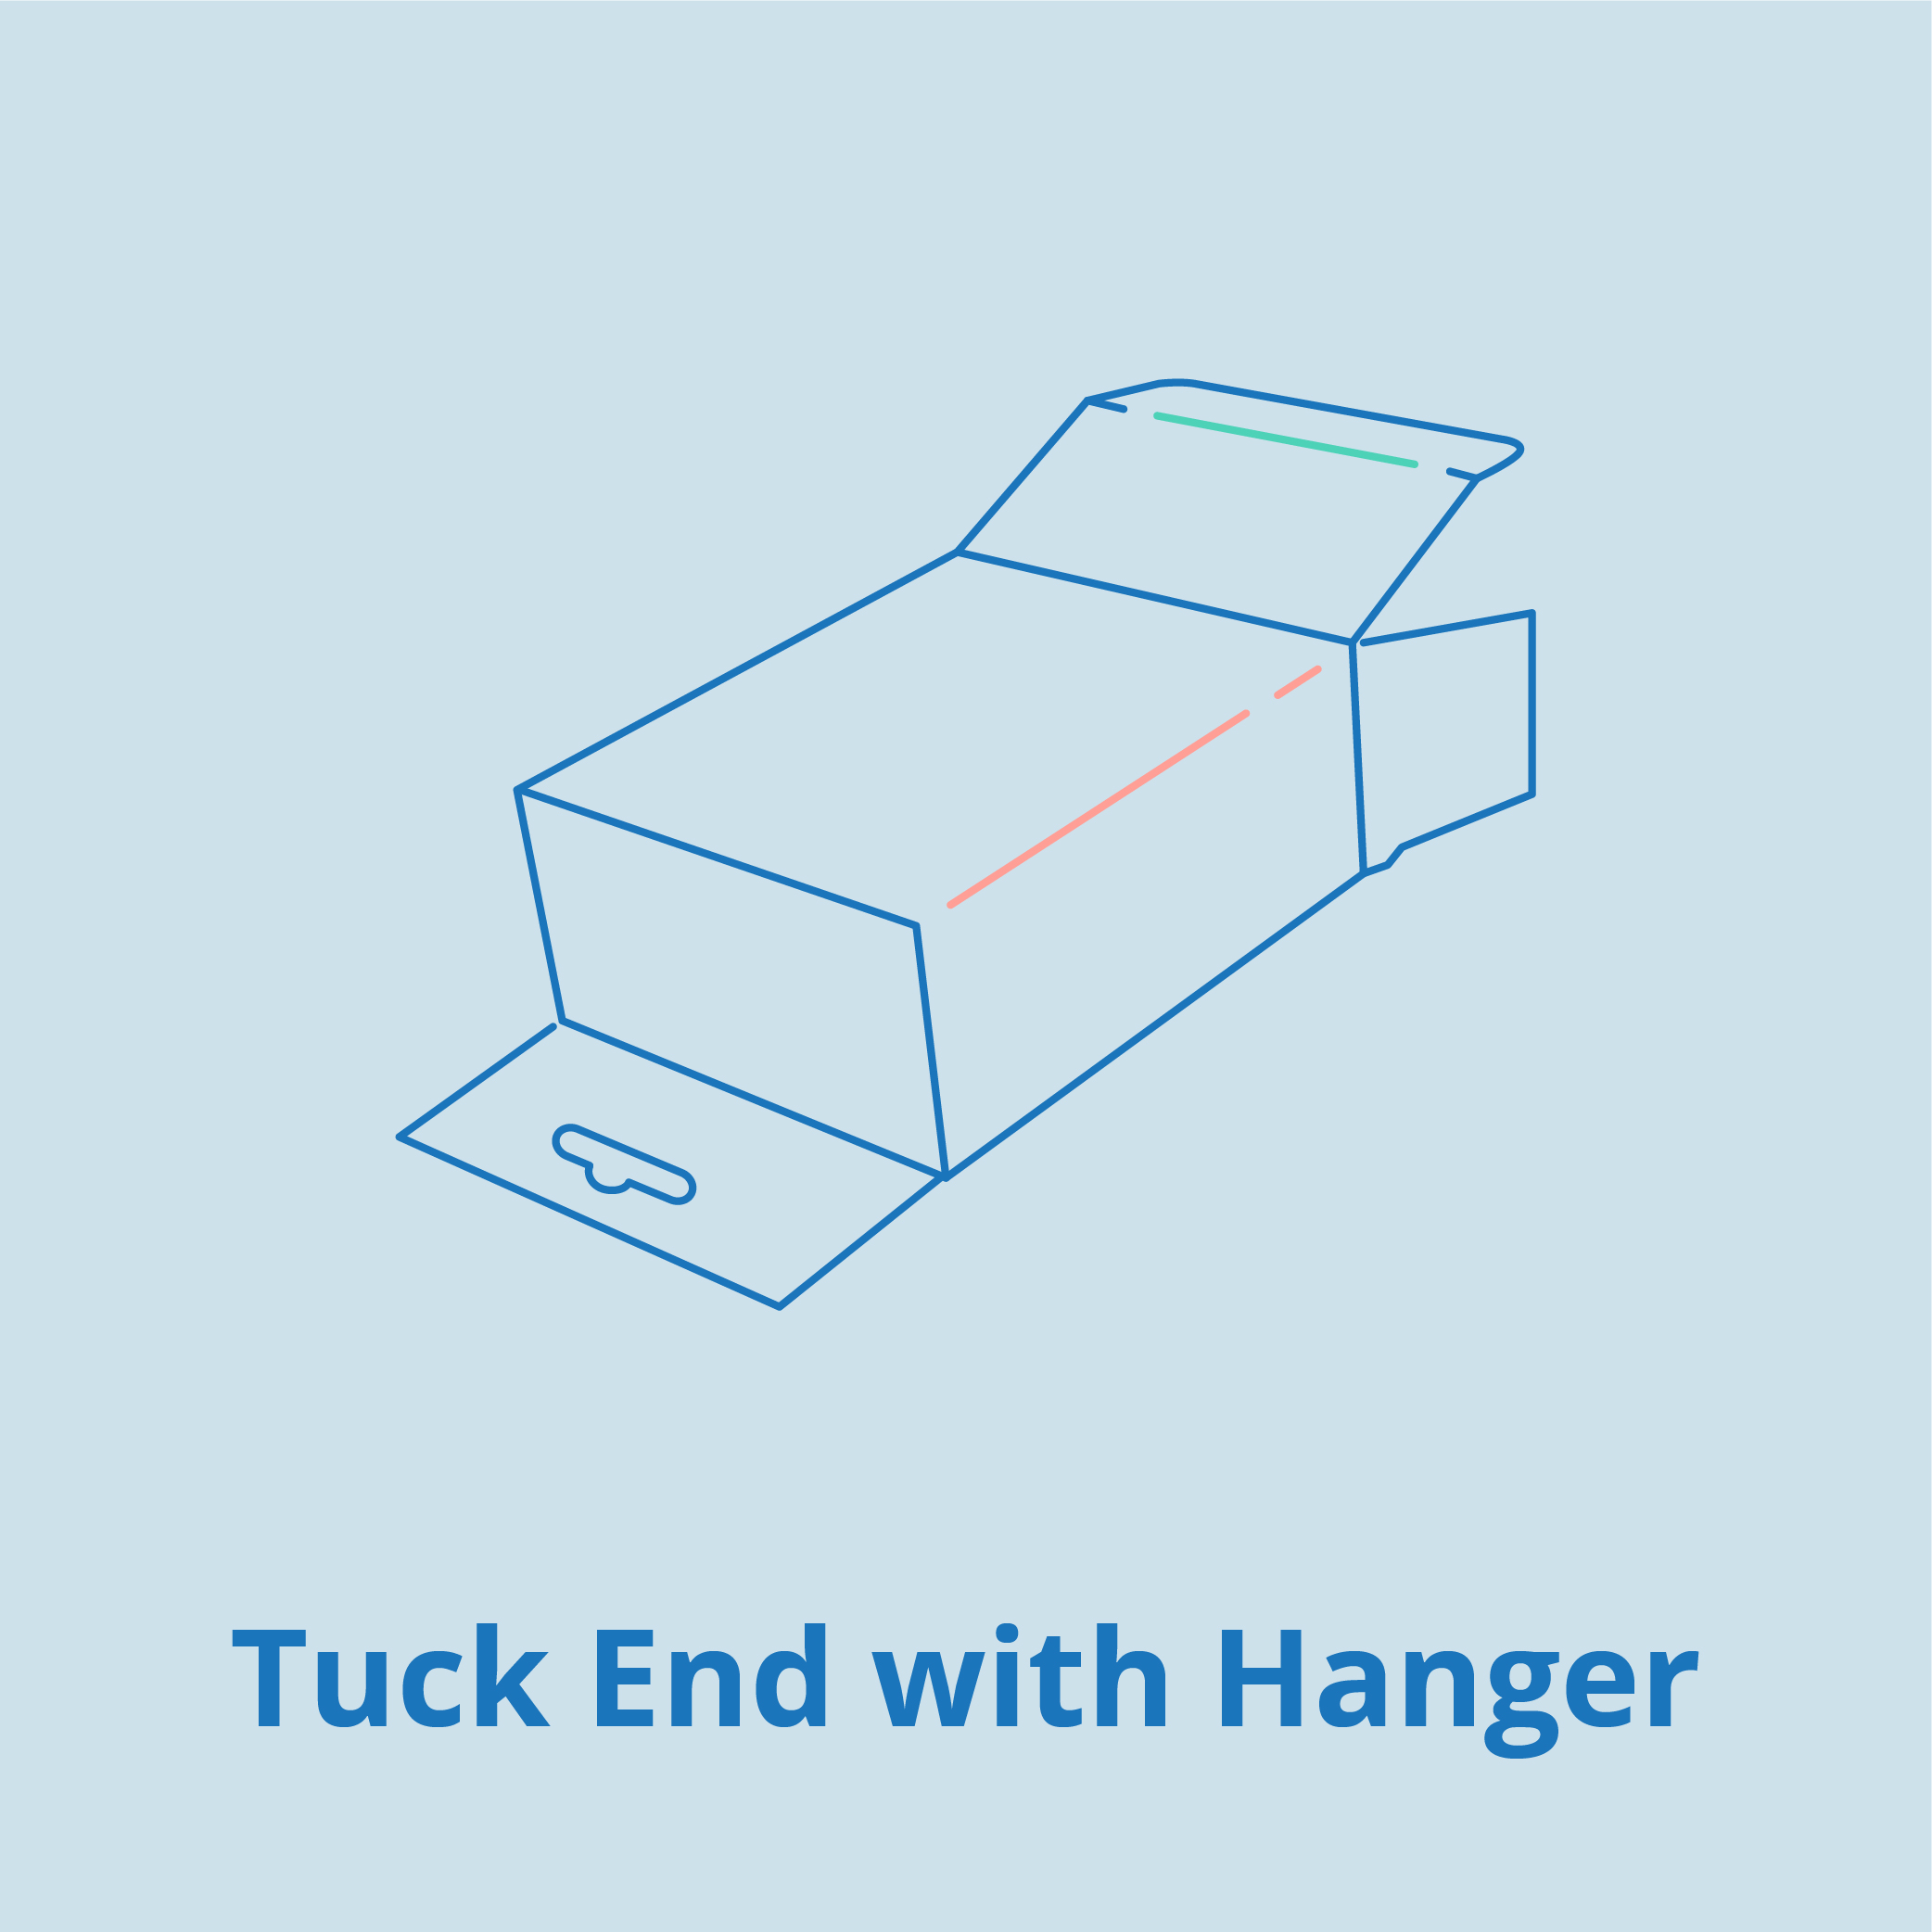 Tuck End with Hanger